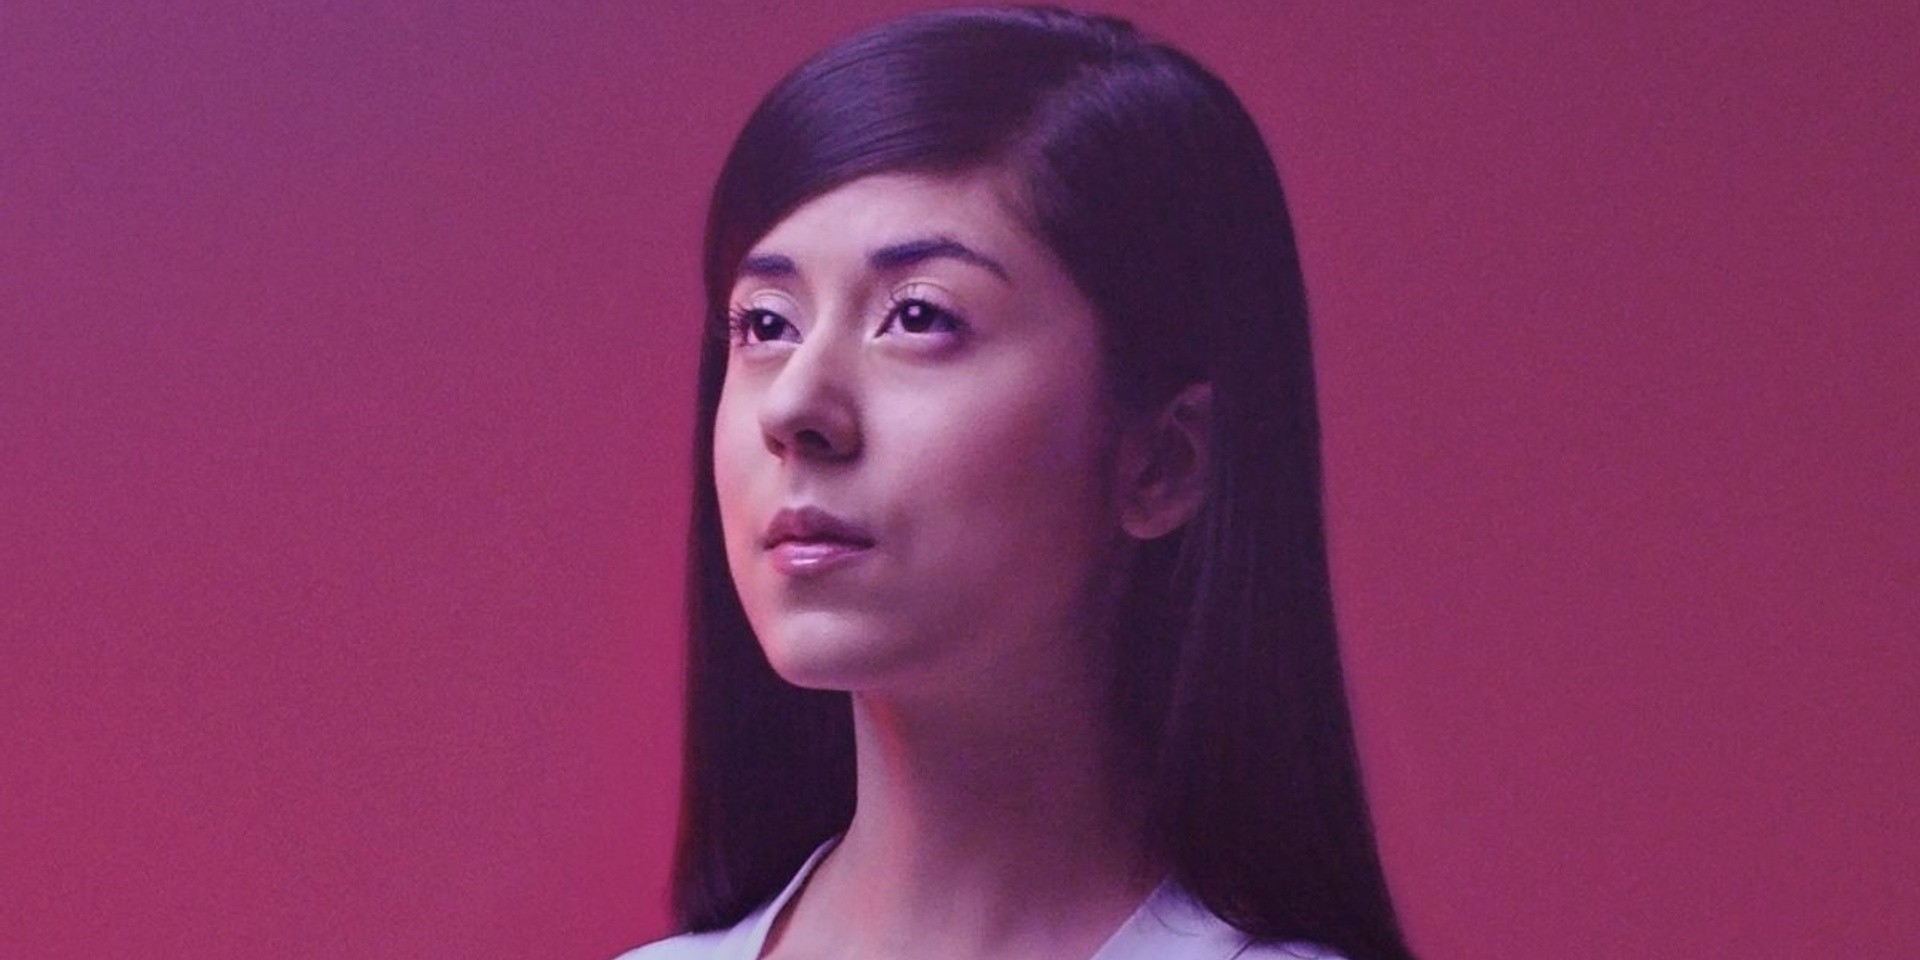 Daniela Andrade sets sail for Asia, it's about time we bring her to Manila